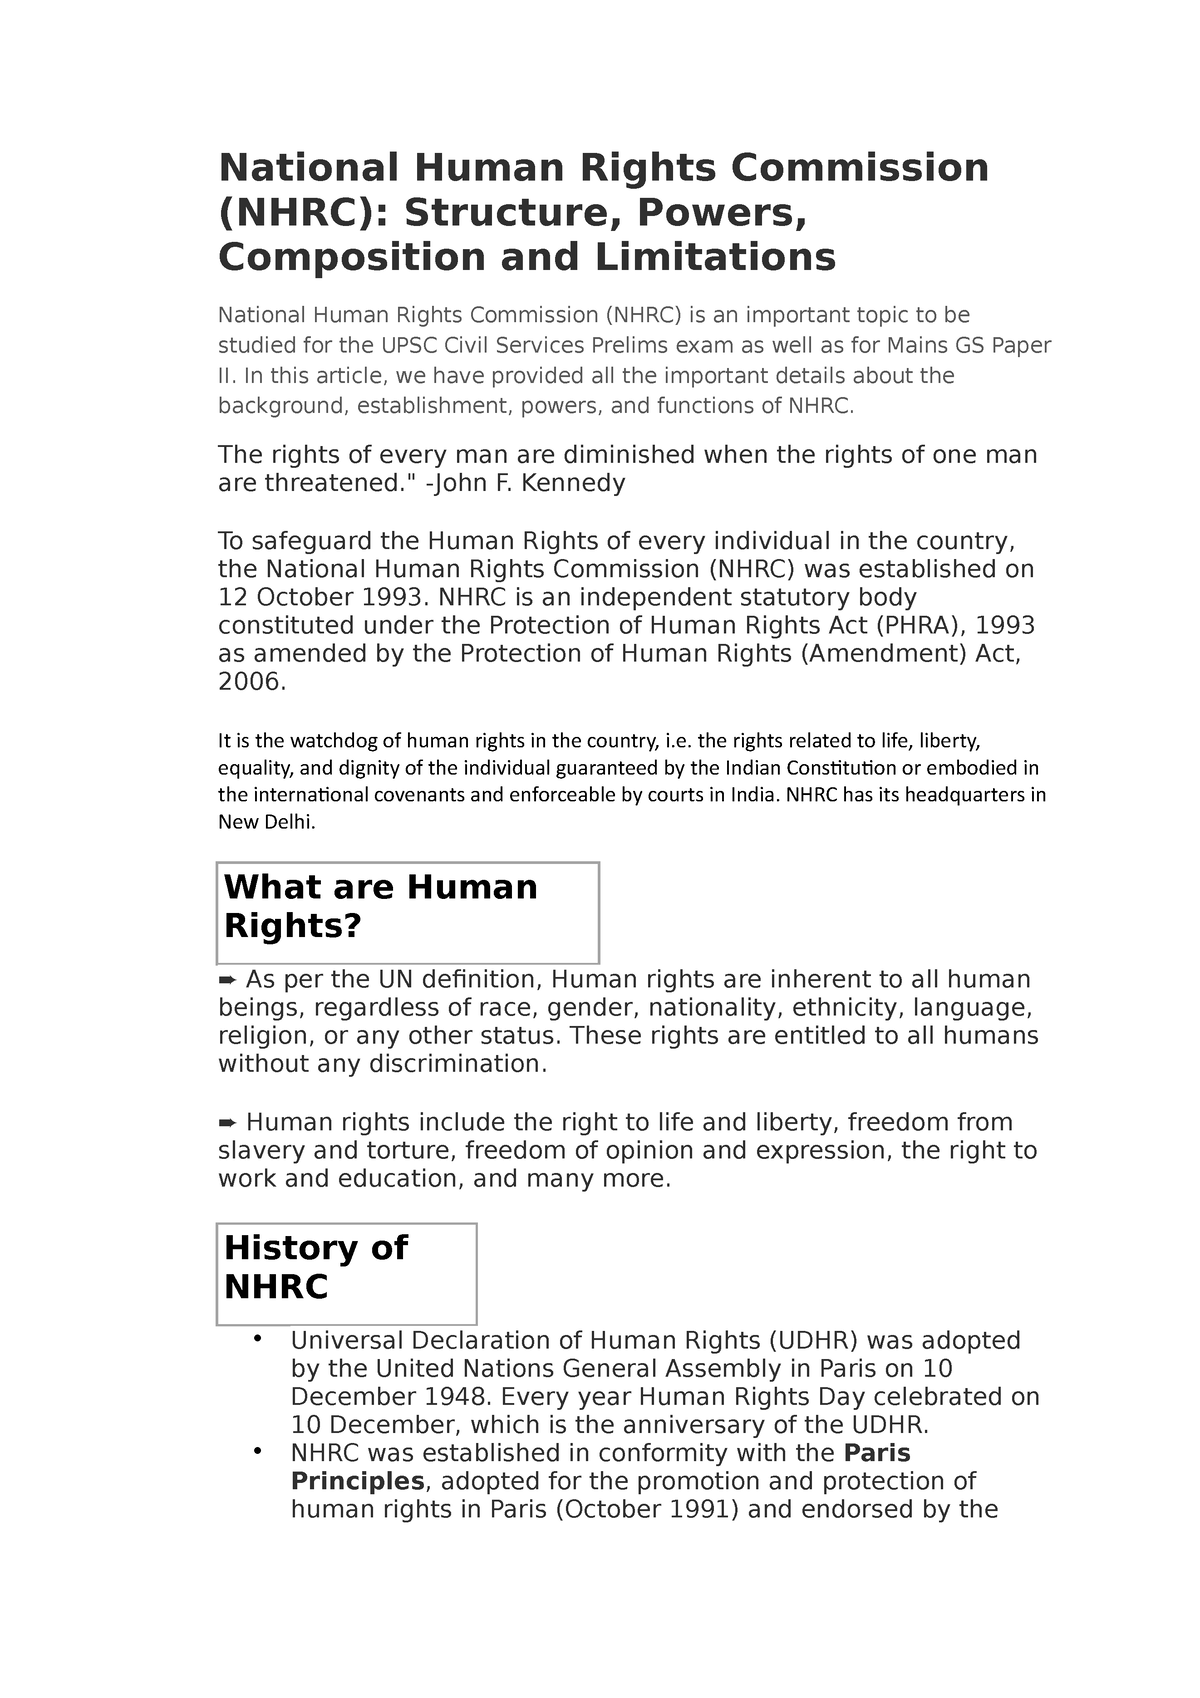 human rights commission assignment